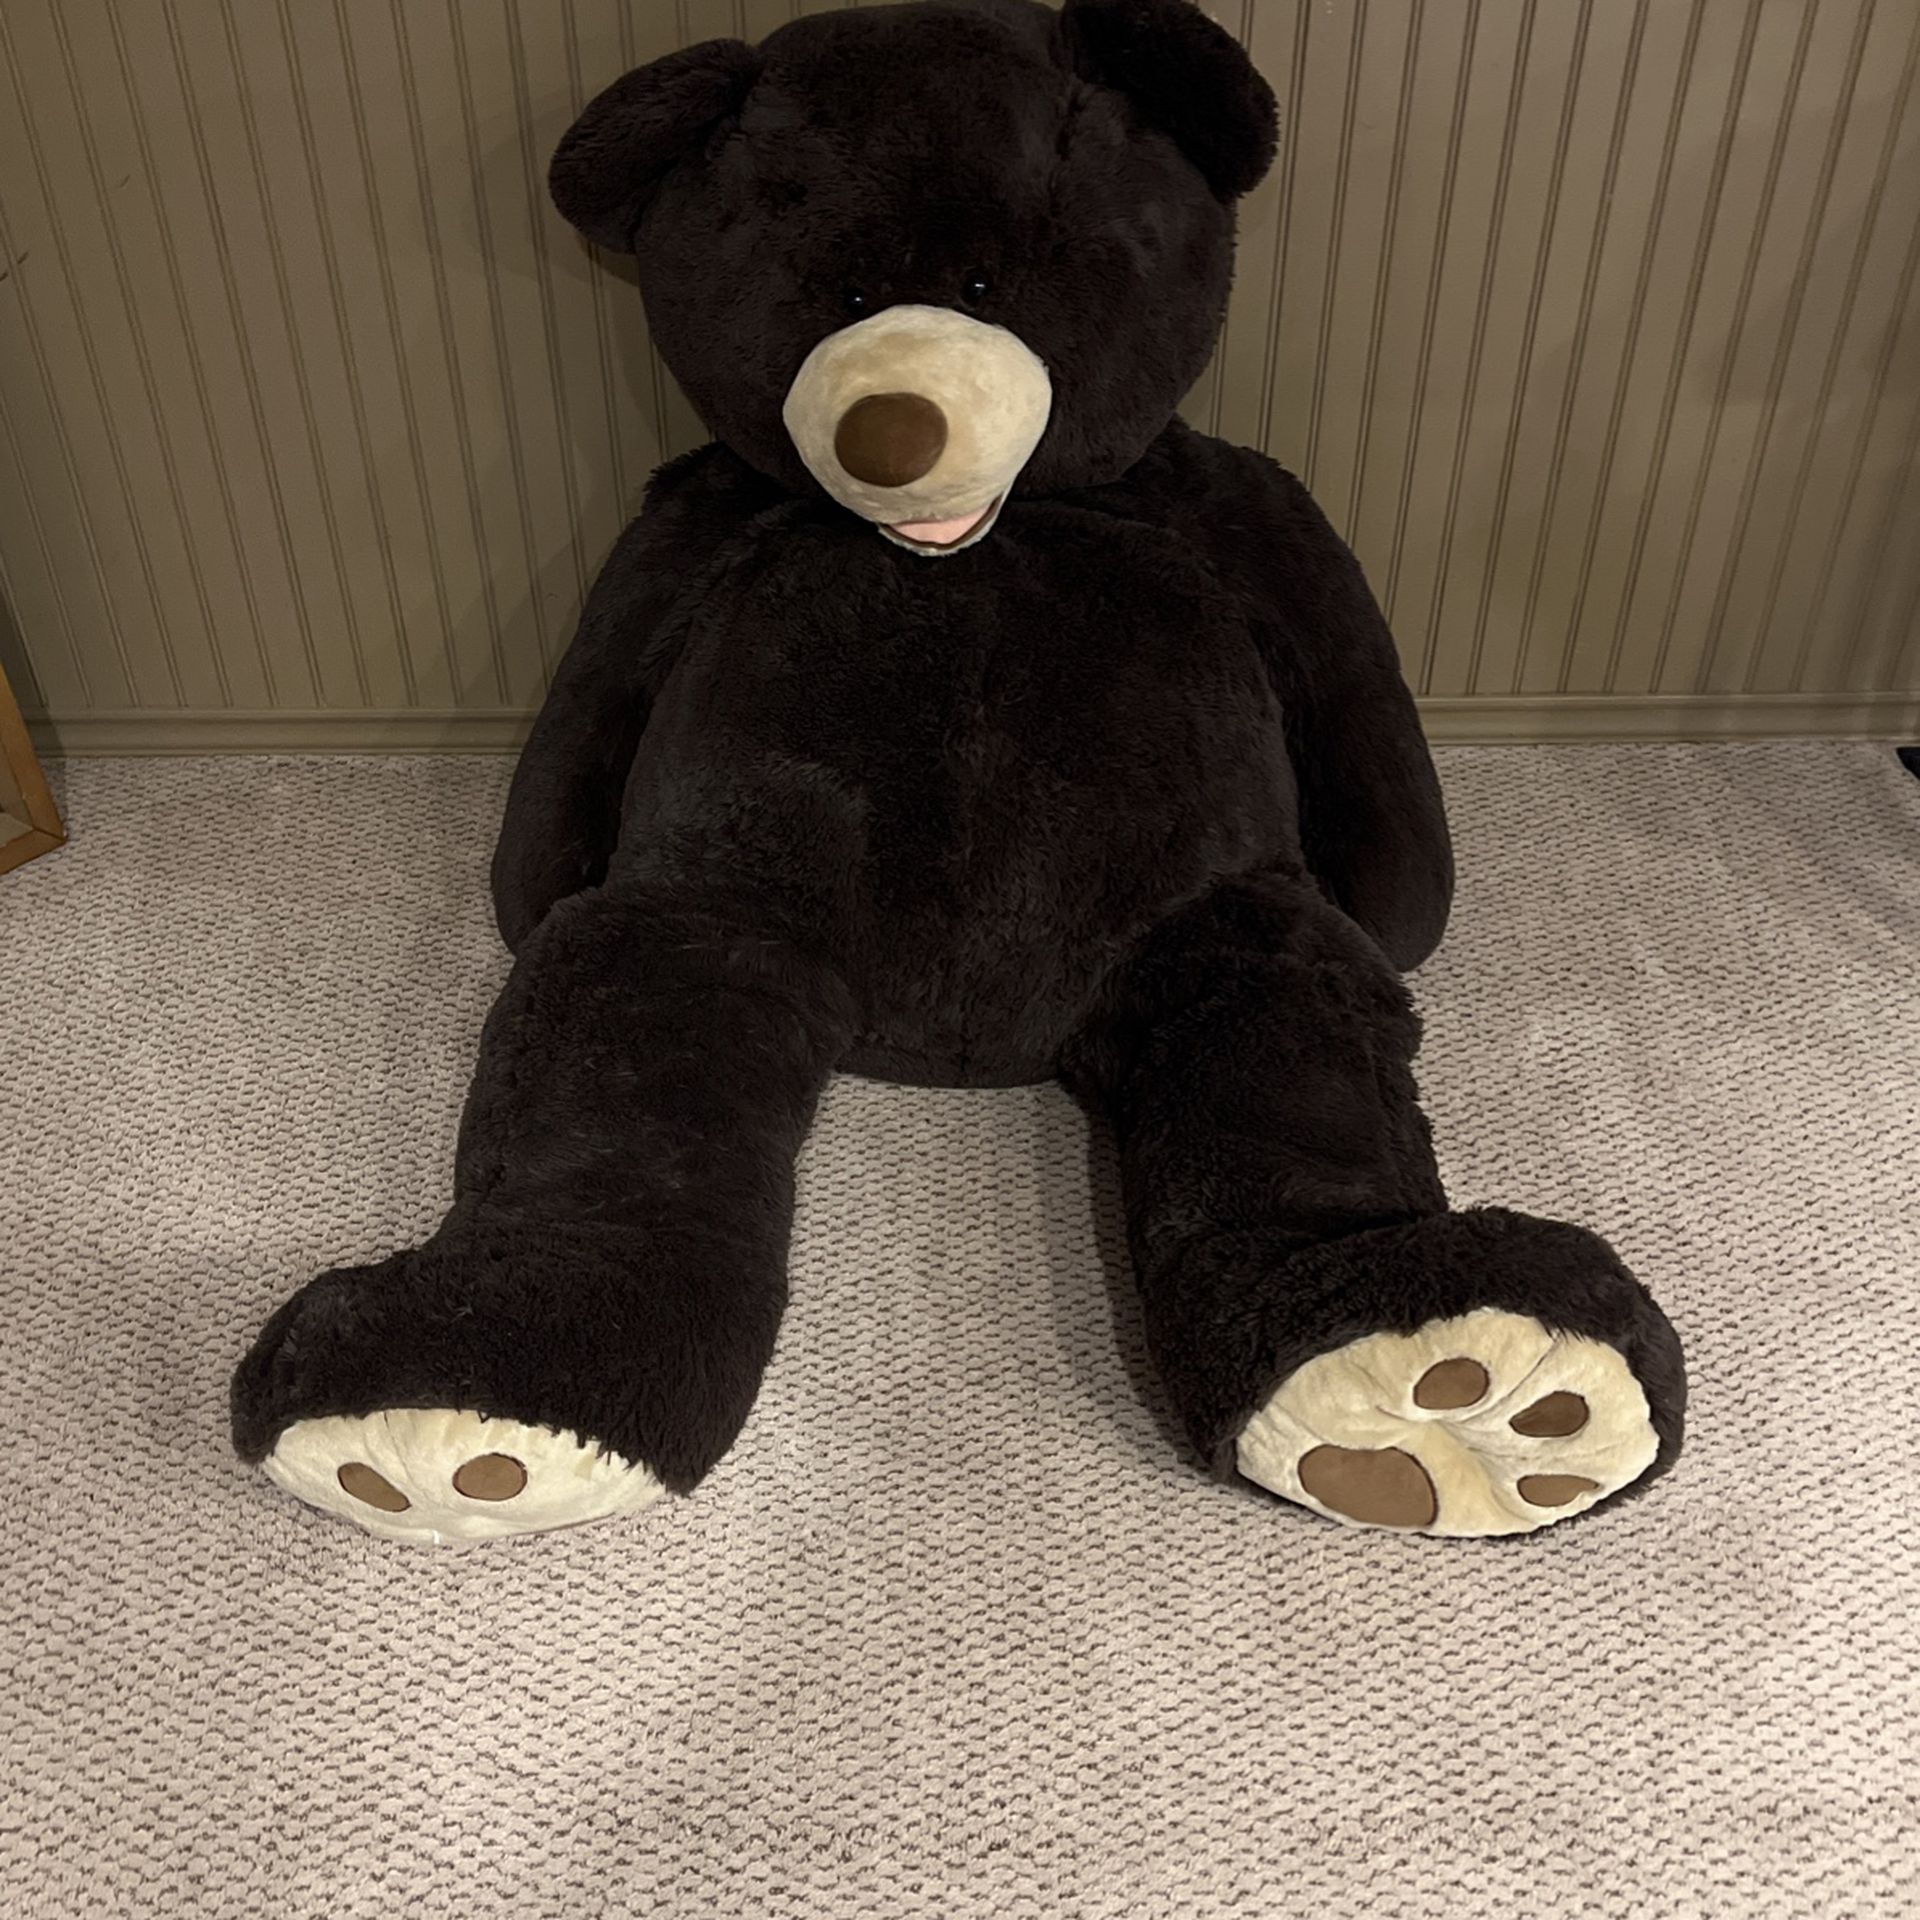 Giant Stuffed Bear (about 4ft)